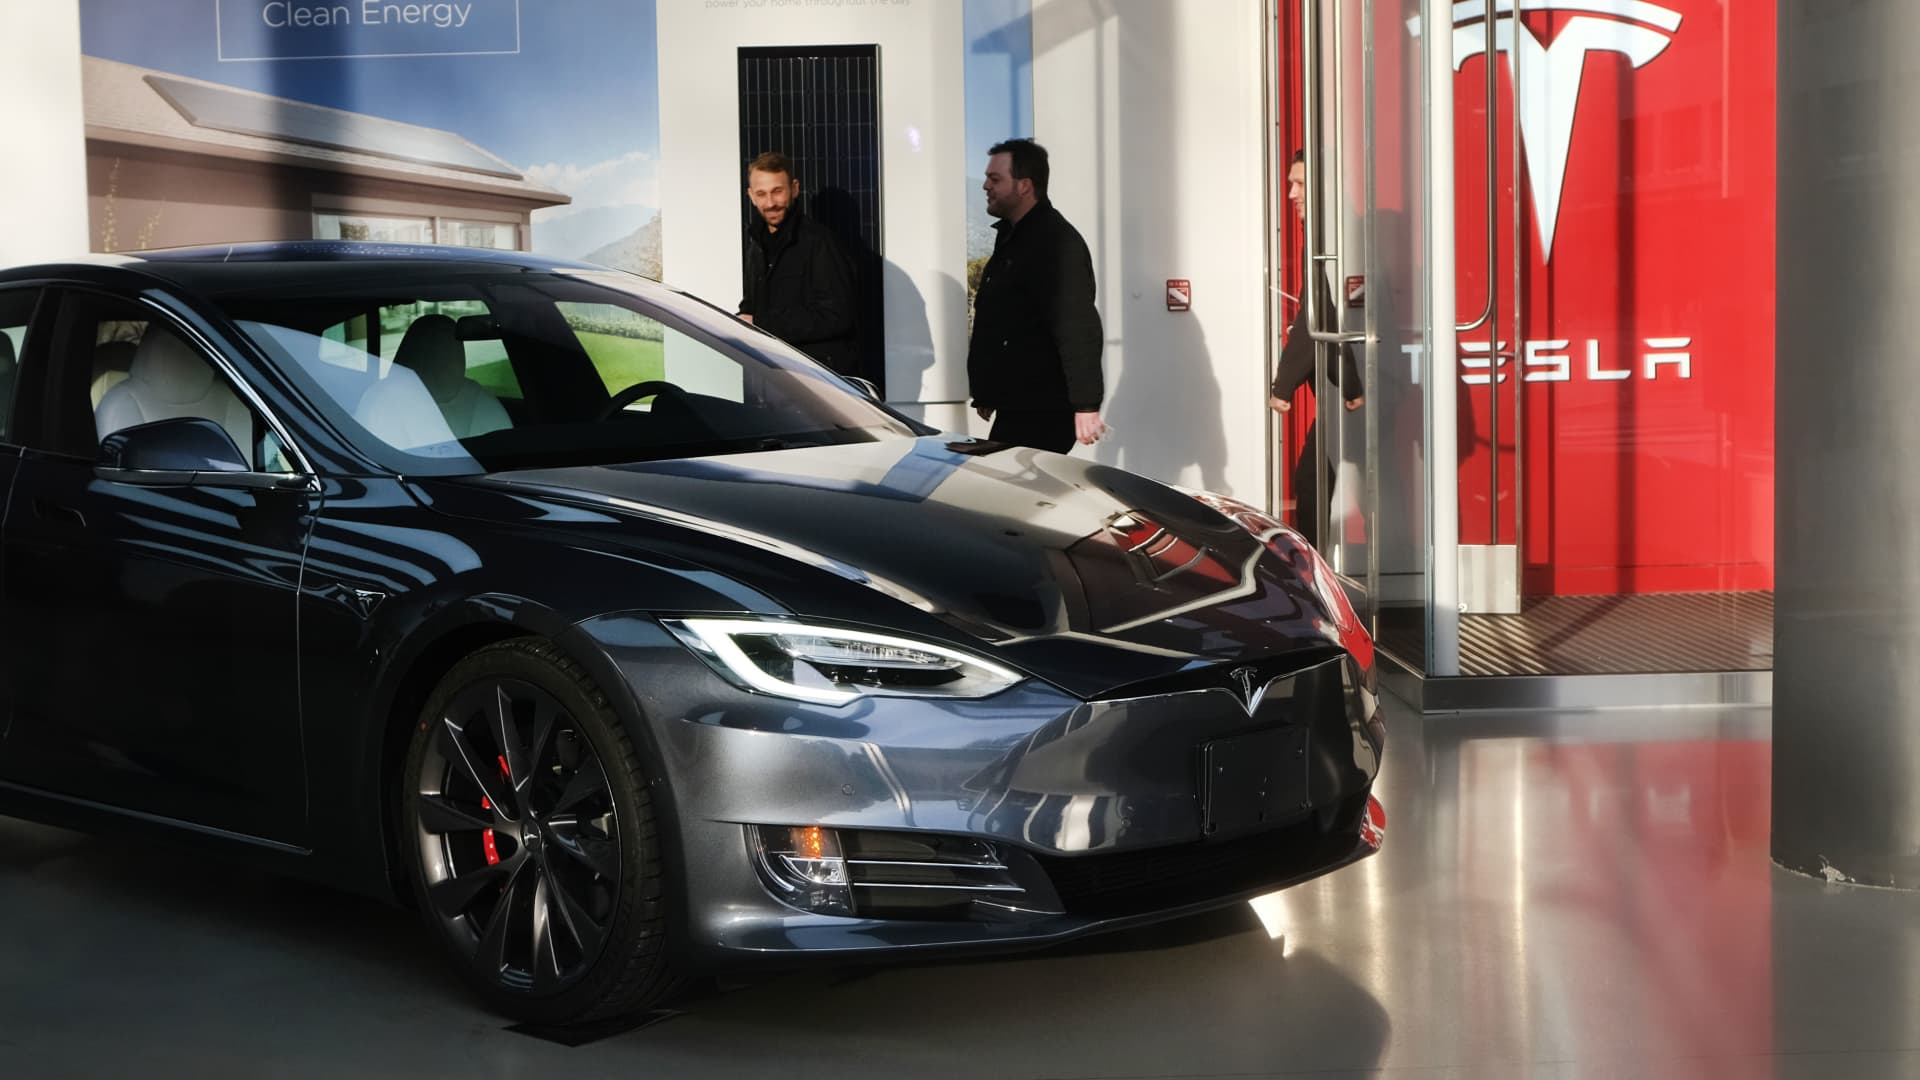 Tesla's dominance of EVs is eroding as cheaper cars hit the market